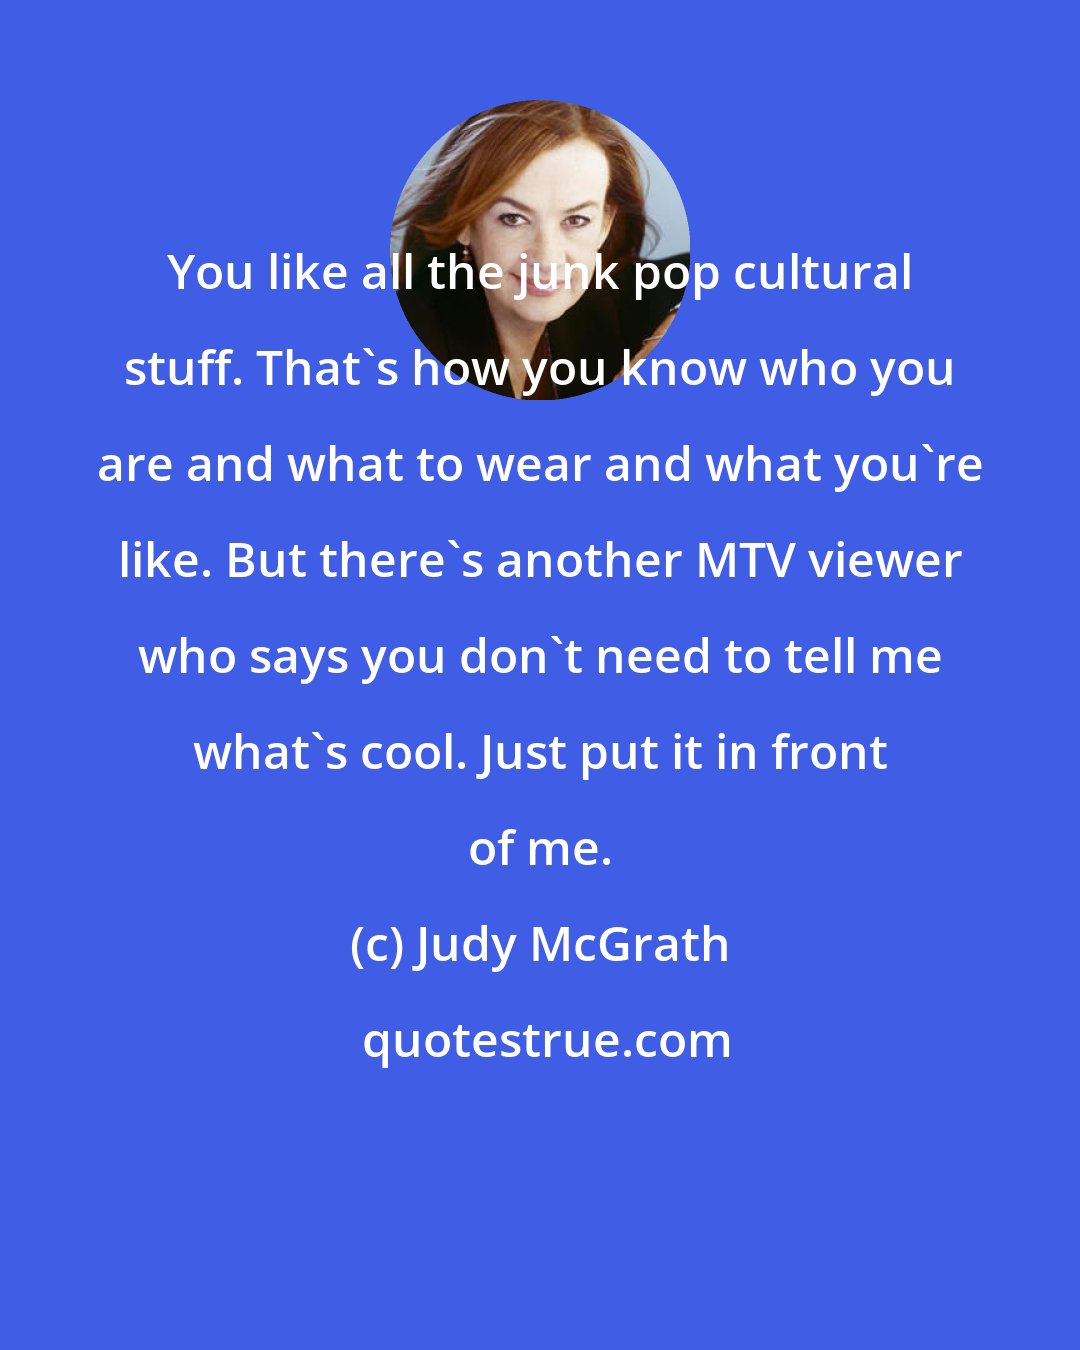 Judy McGrath: You like all the junk pop cultural stuff. That's how you know who you are and what to wear and what you're like. But there's another MTV viewer who says you don't need to tell me what's cool. Just put it in front of me.